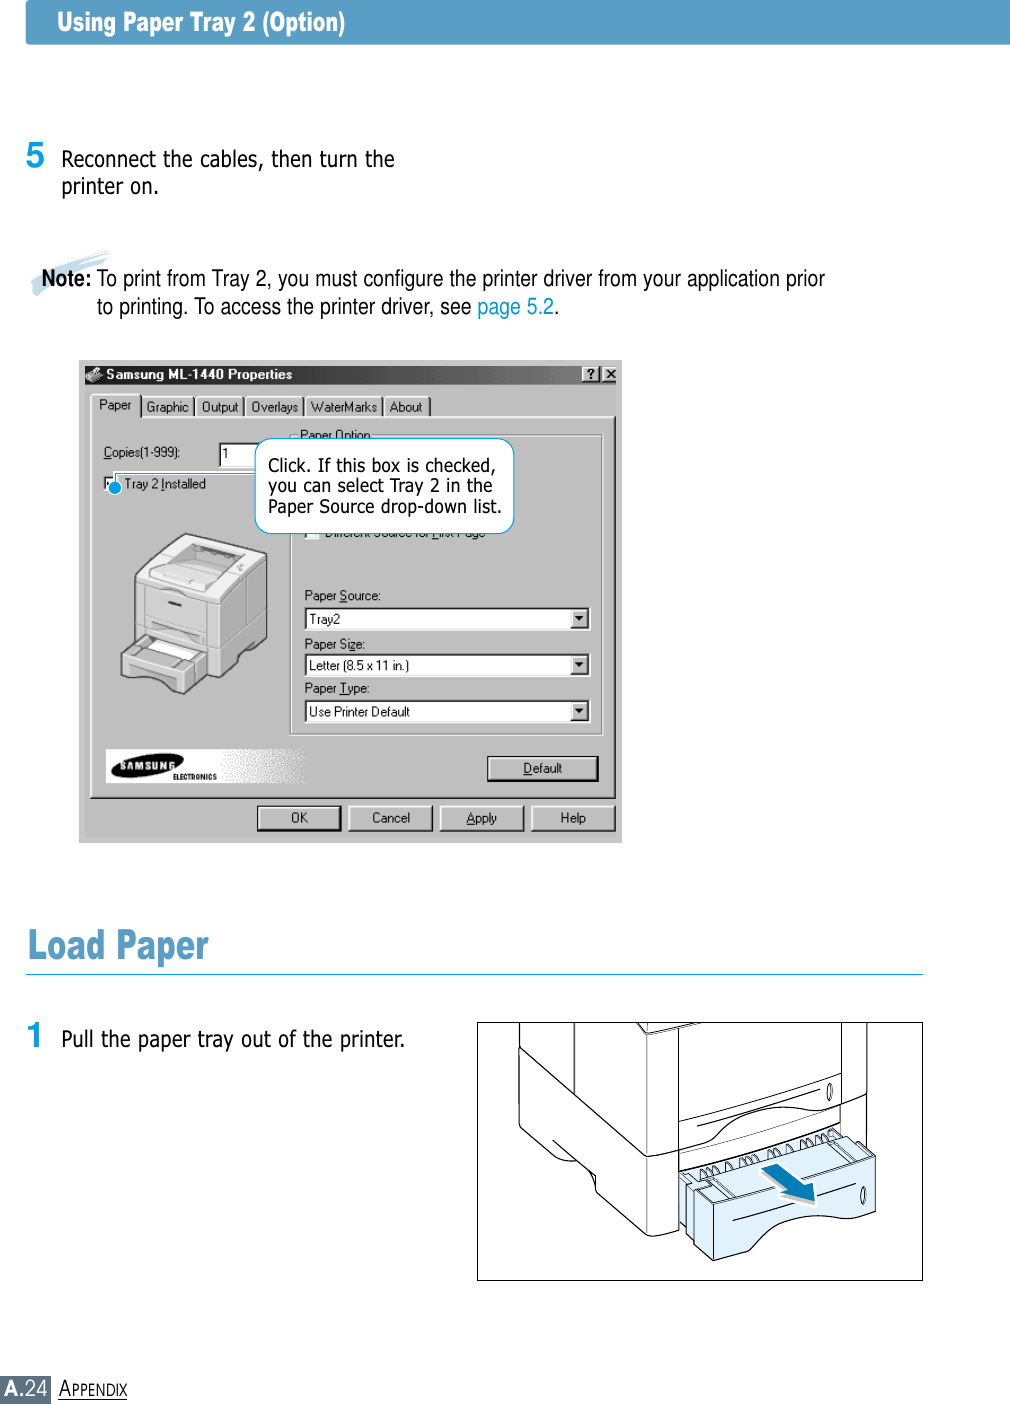 A.24APPENDIXUsing Paper Tray 2 (Option)Load Paper1Pull the paper tray out of the printer.5Reconnect the cables, then turn theprinter on.Note: To print from Tray 2, you must configure the printer driver from your application priorto printing. To access the printer driver, see page 5.2.Click. If this box is checked,you can select Tray 2 in thePaper Source drop-down list.